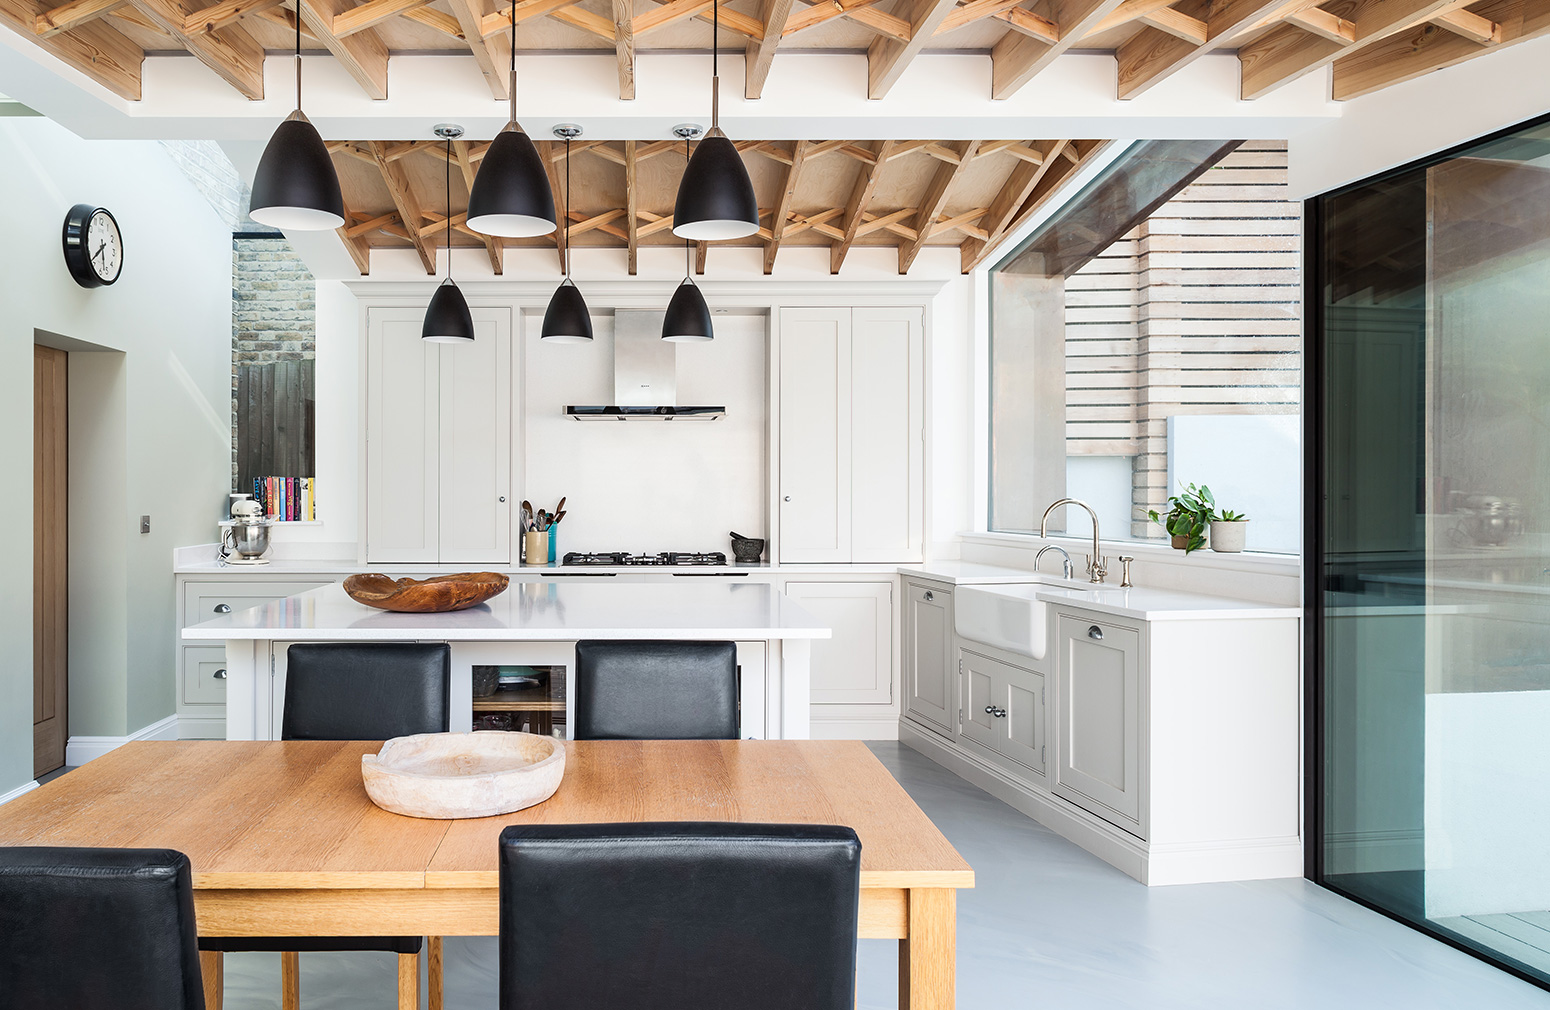 16 Ewelme Road by Uvarchitects. Photography: David Butler